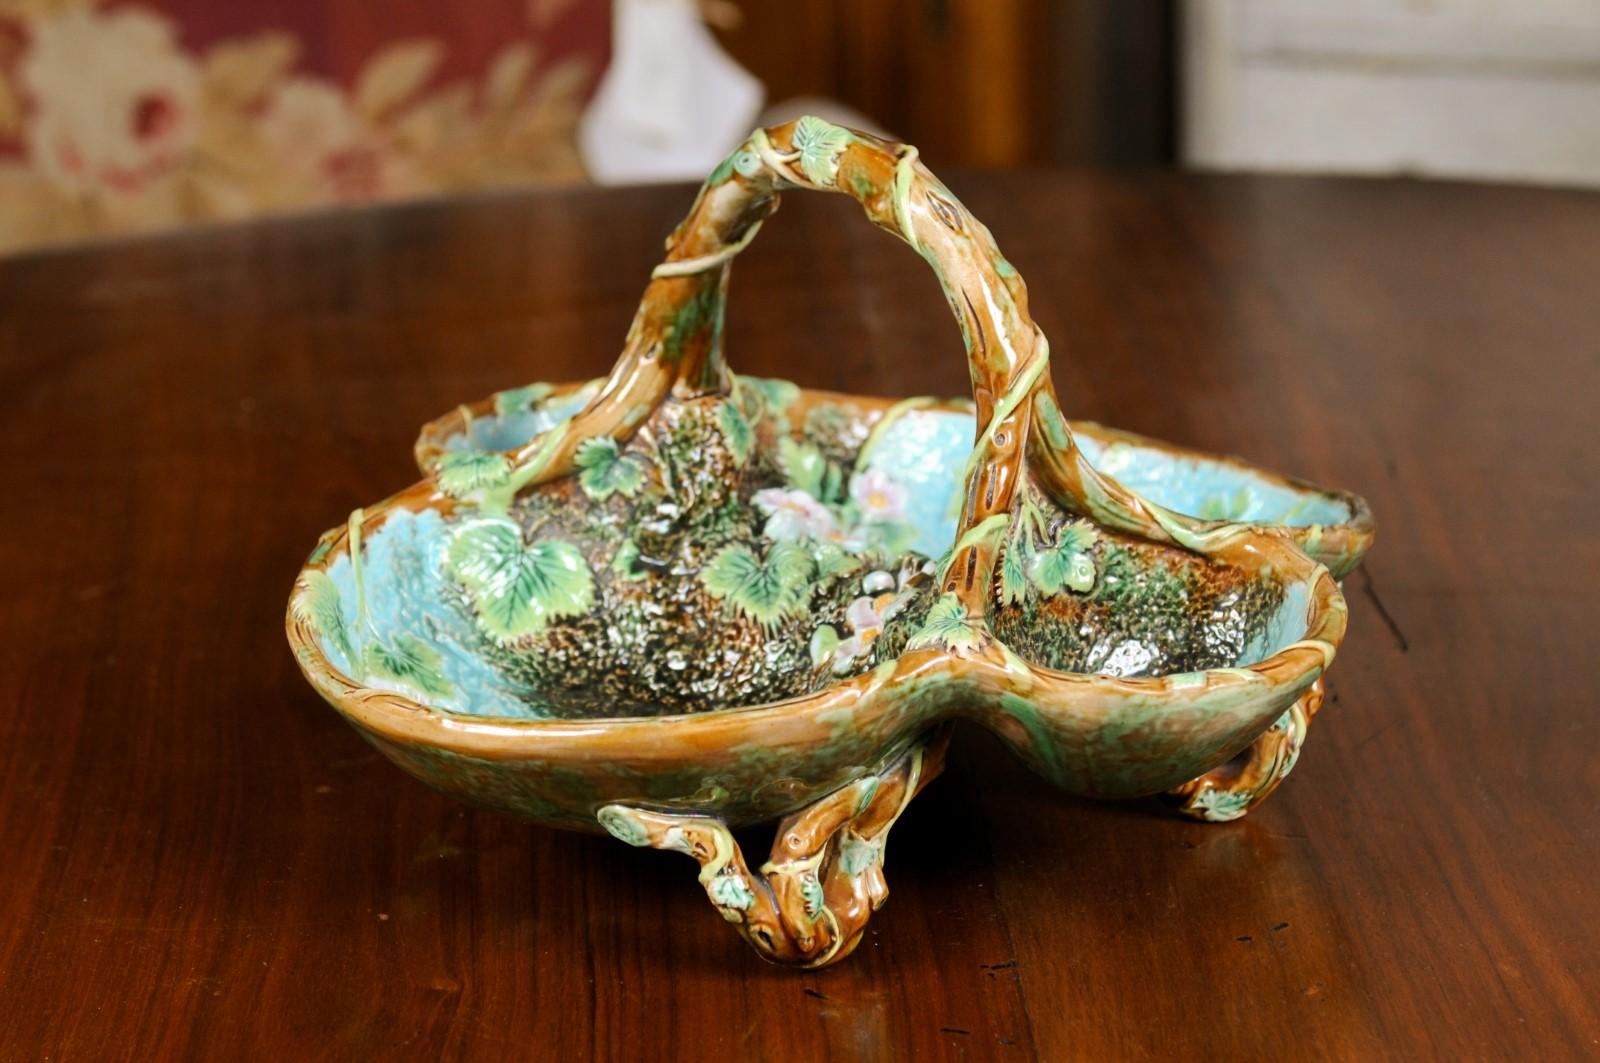 Victorian 19th Century George Jones Four-Part Majolica Porcelain Serving Bowl with Daisies For Sale